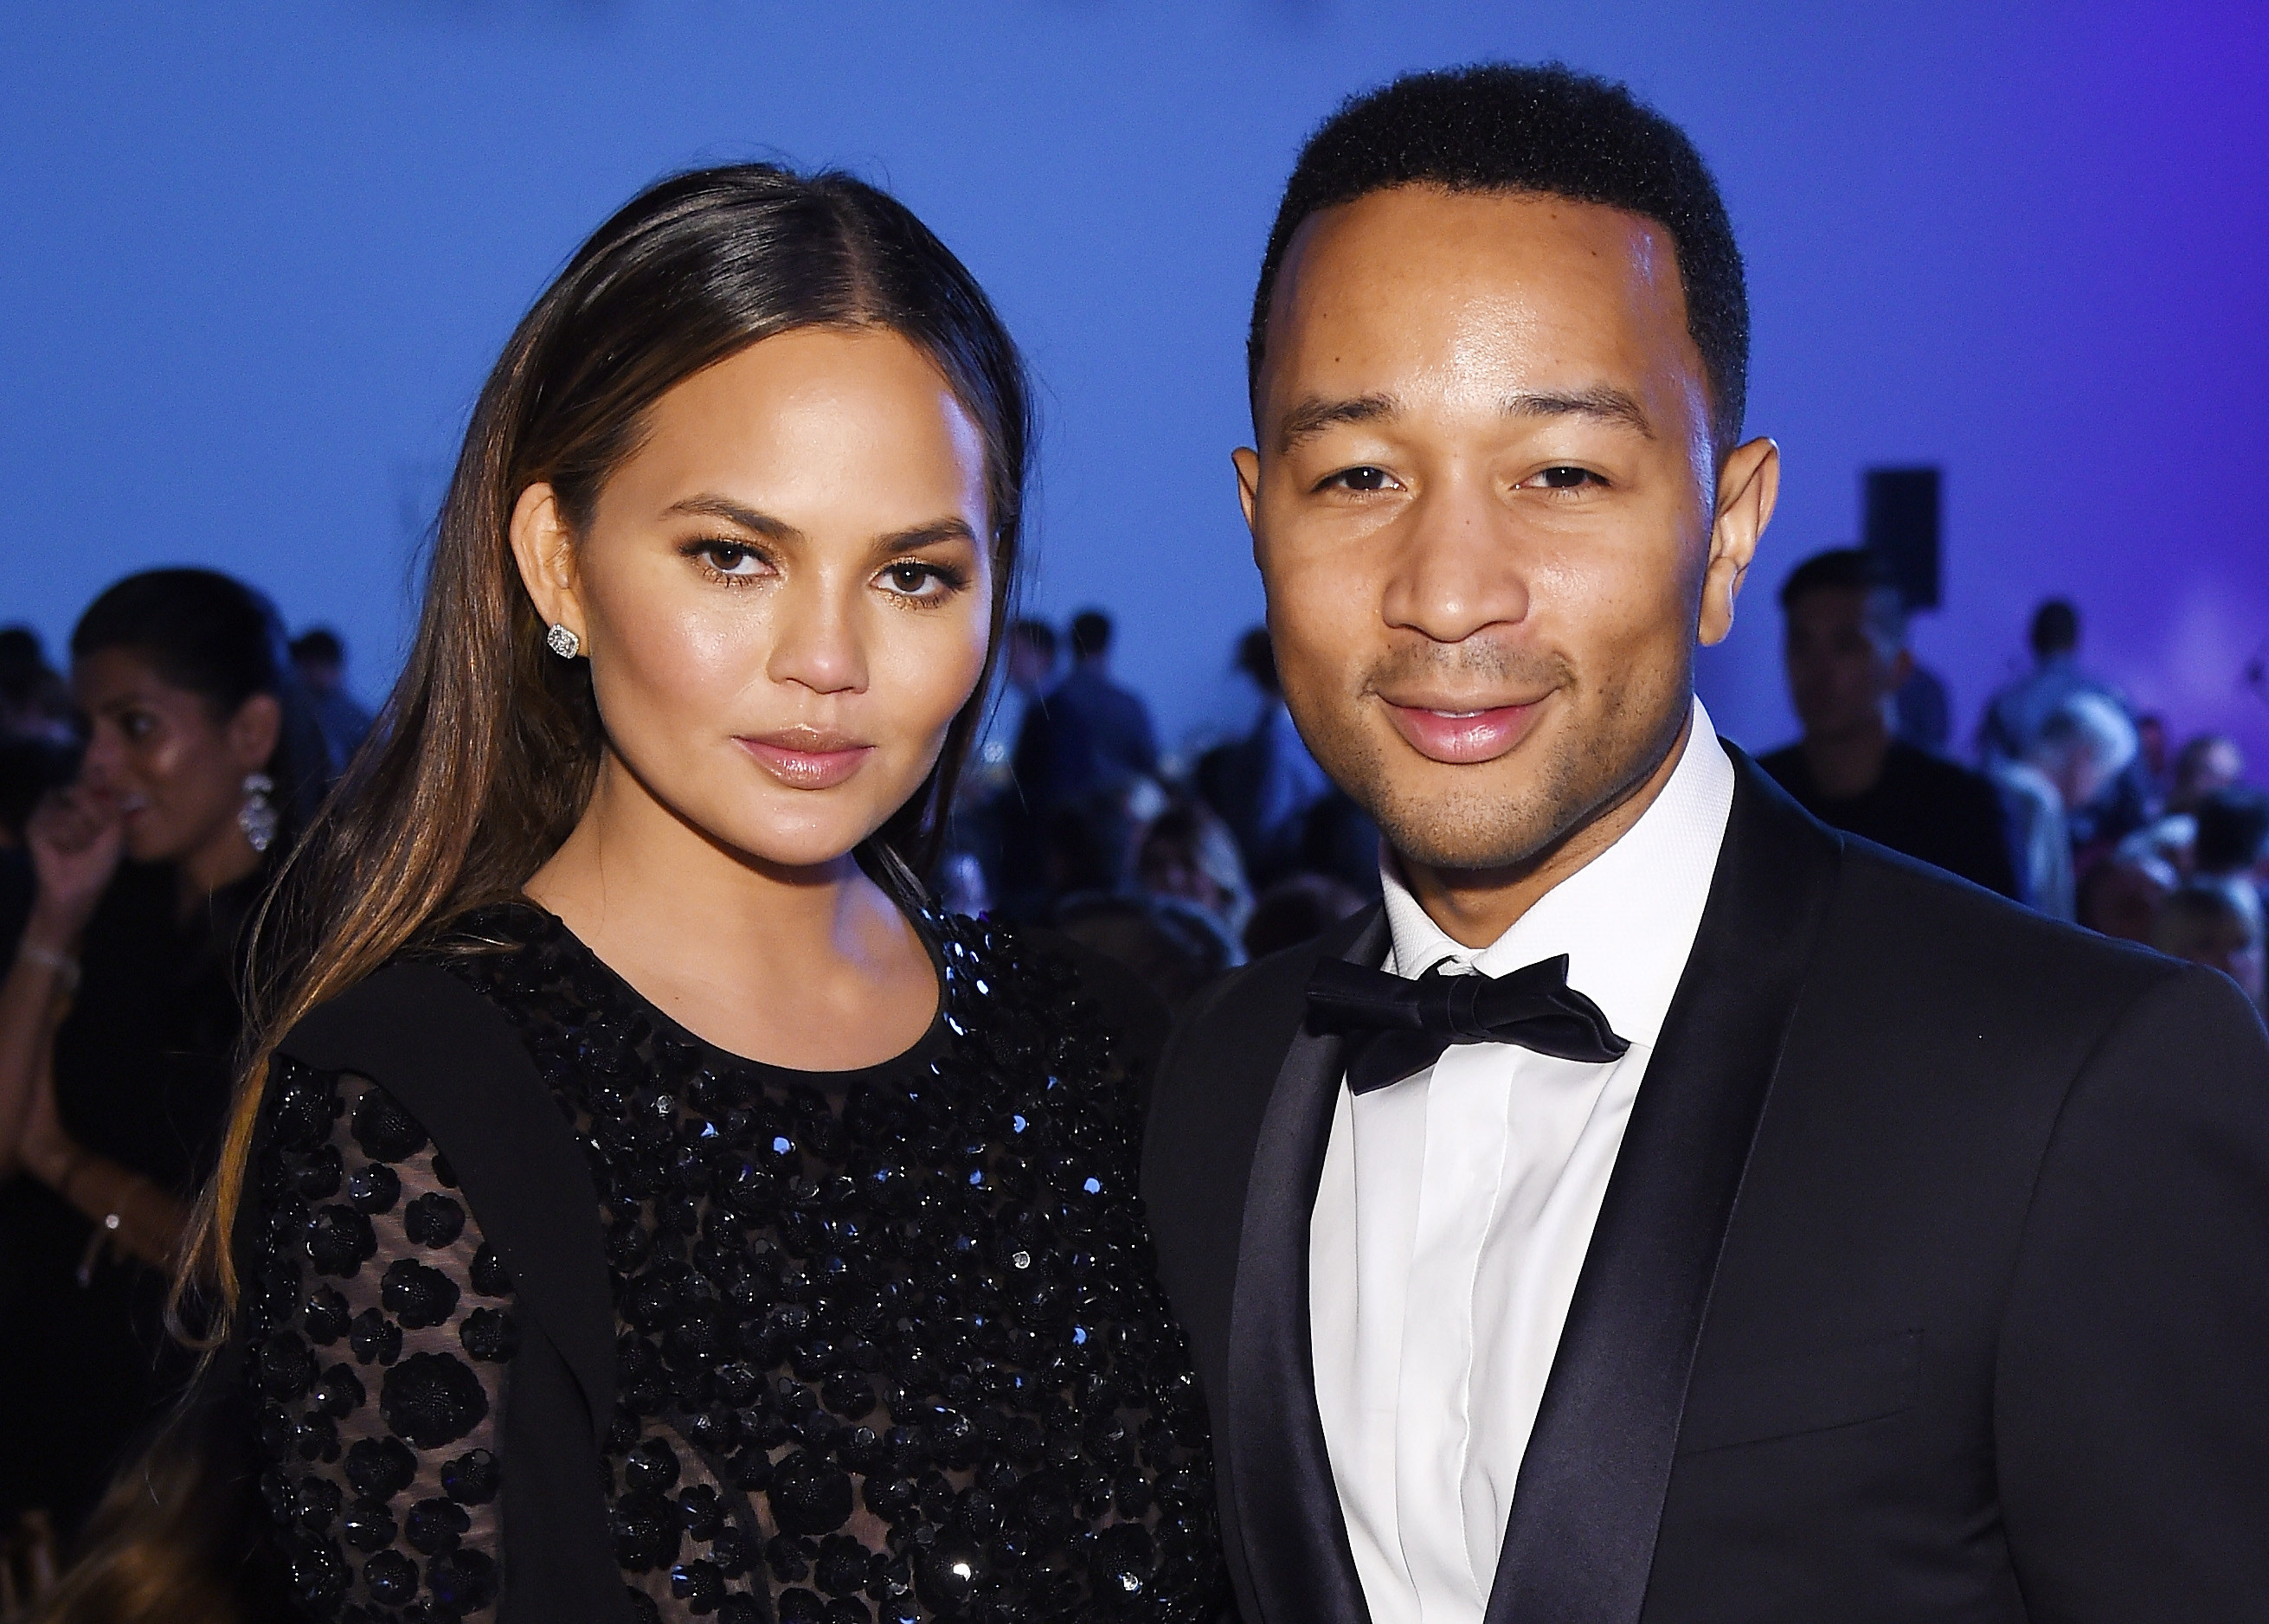 Chrissy Teigen in a sparkly black dress and John Legend in a tuxedo posing for the camera